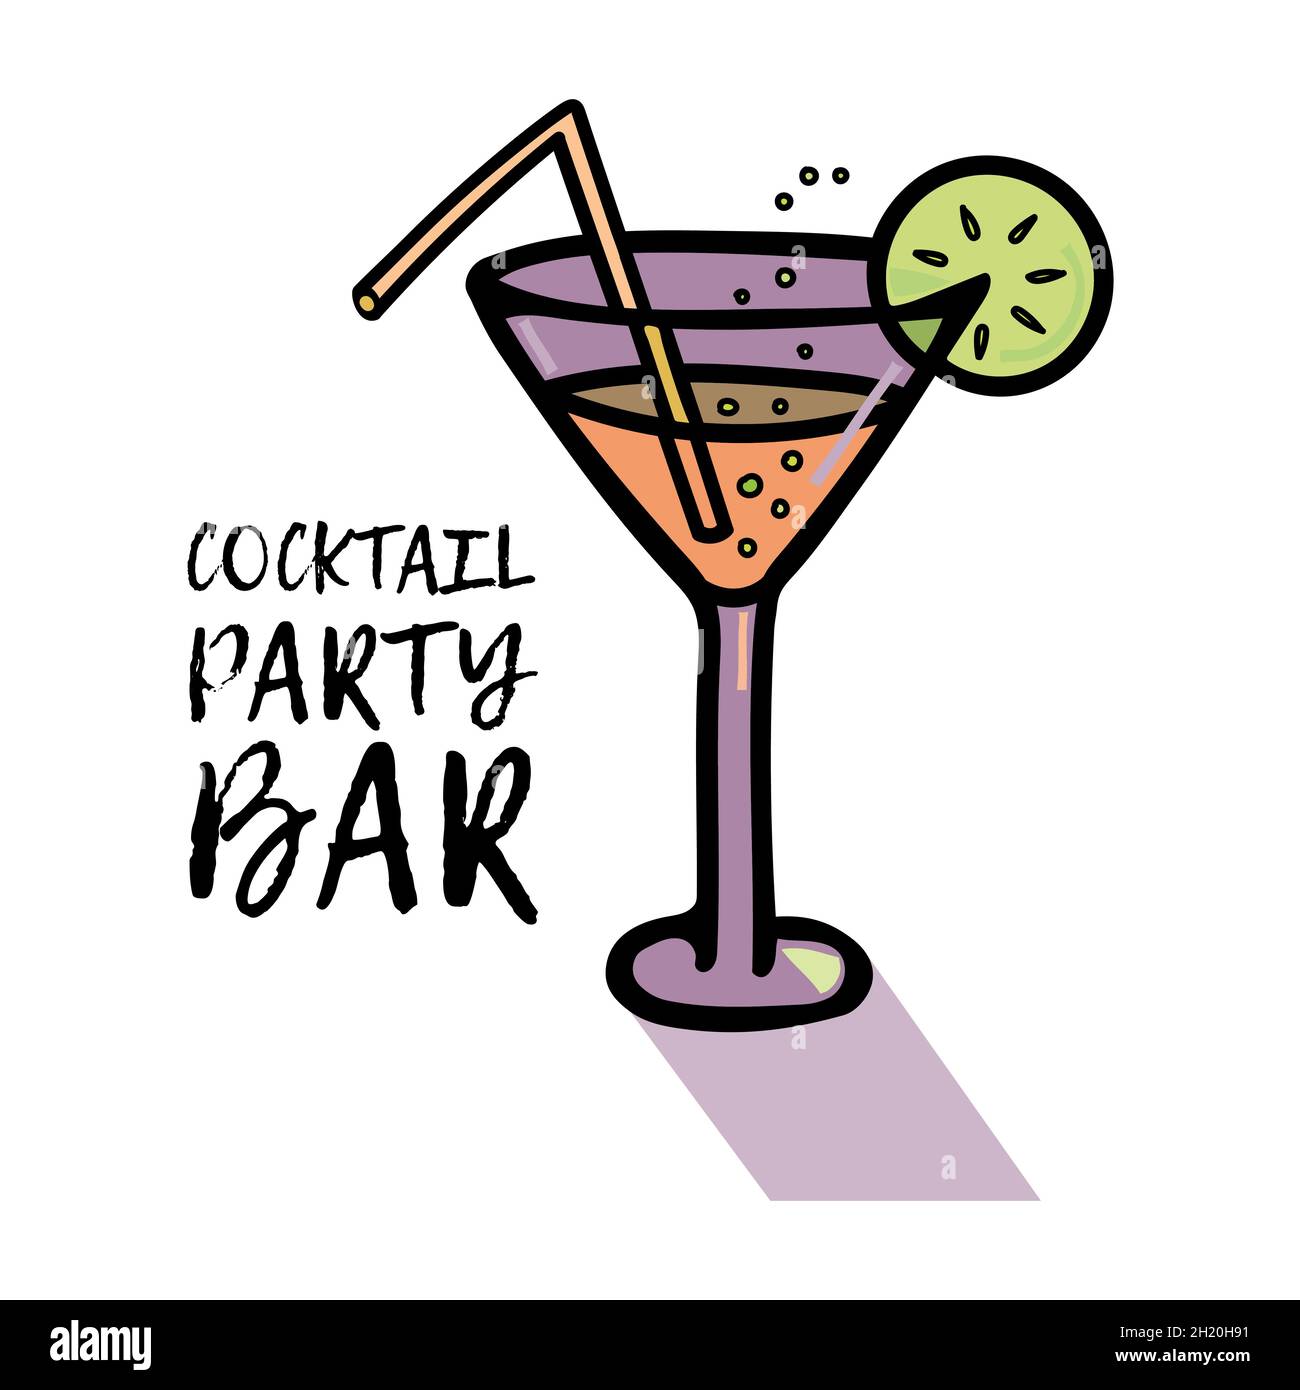 https://c8.alamy.com/comp/2H20H91/vector-illustration-of-a-glass-with-a-cocktail-bubbles-and-a-slice-of-lemon-a-straw-icon-phrase-cocktail-party-bar-2H20H91.jpg